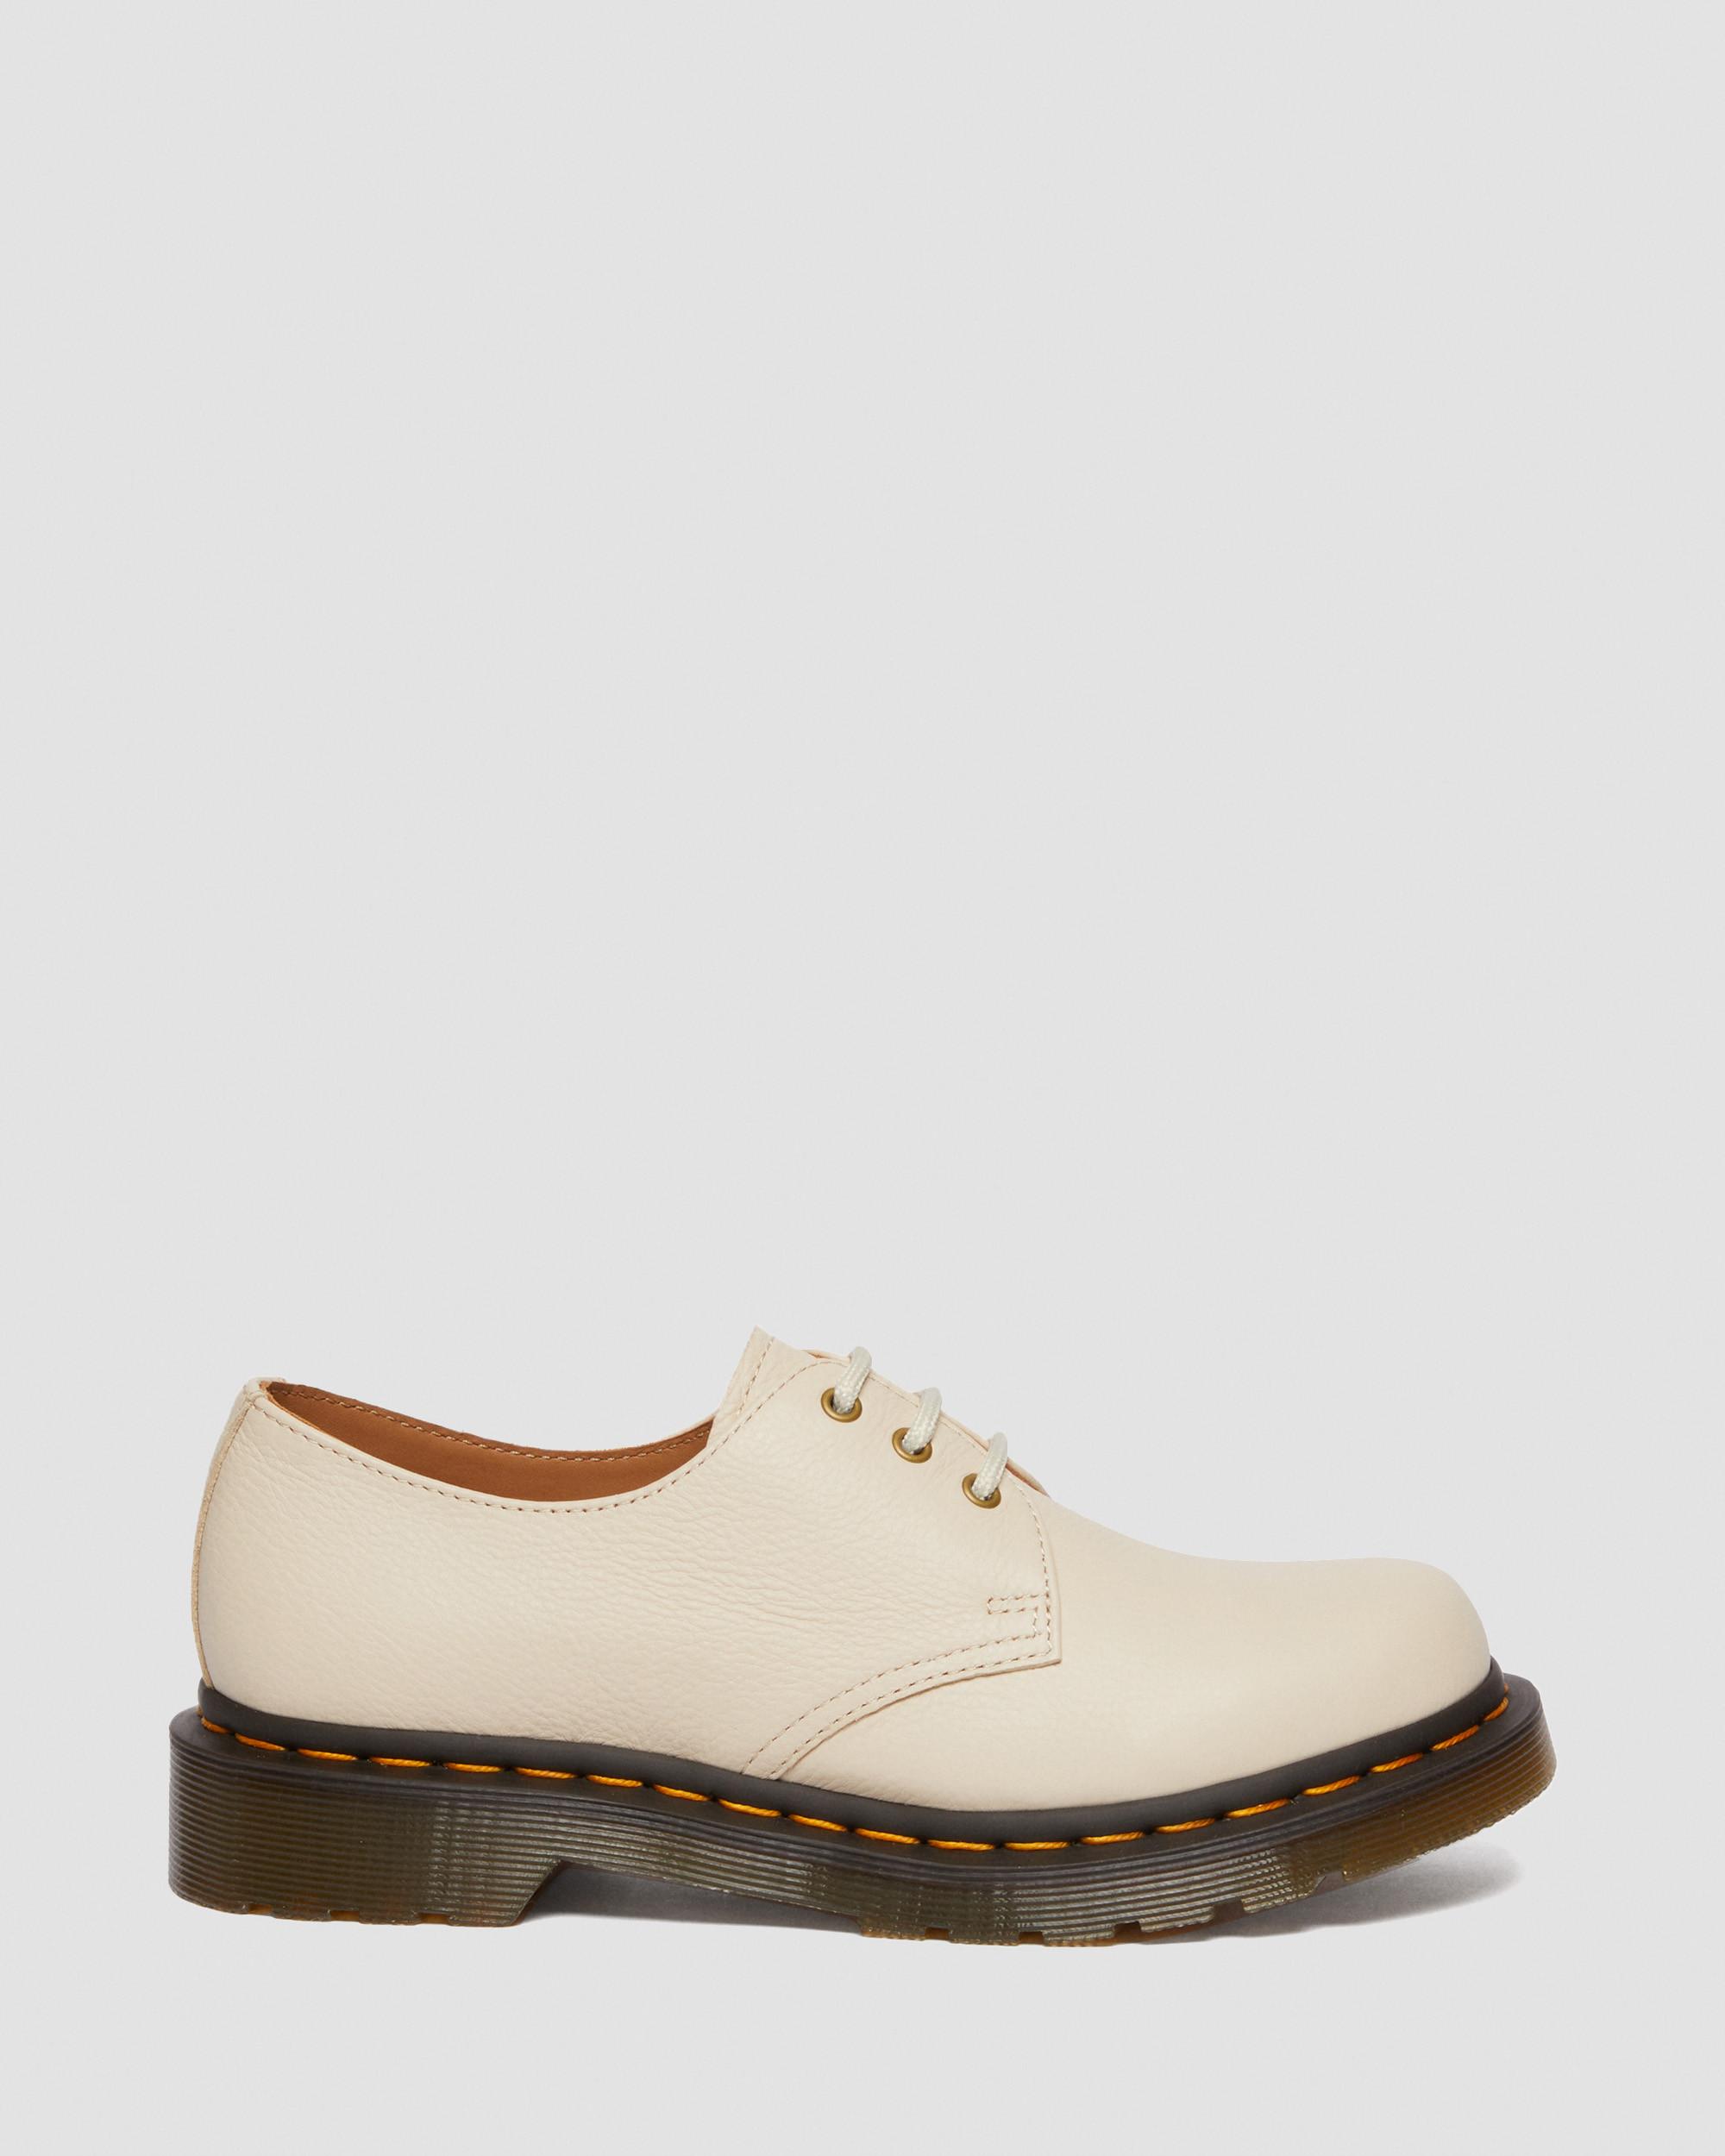 1461 Virginia Leather Oxford Shoes in Parchment Beige | Dr. Martens